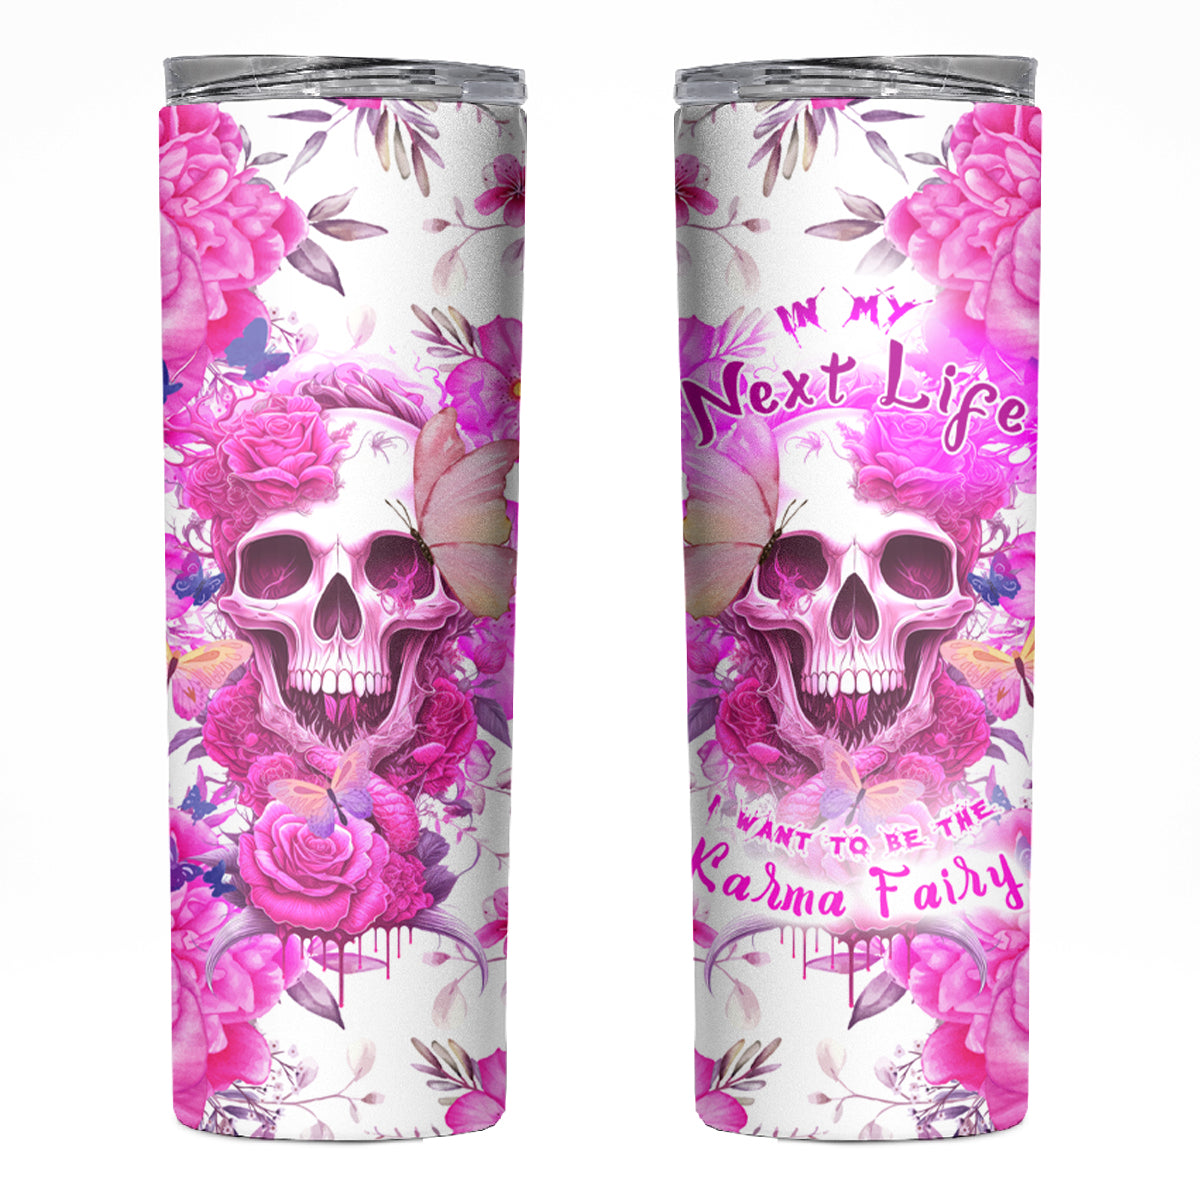 In My Next Life I Want To Be The Karma Fairy Skinny Tumbler